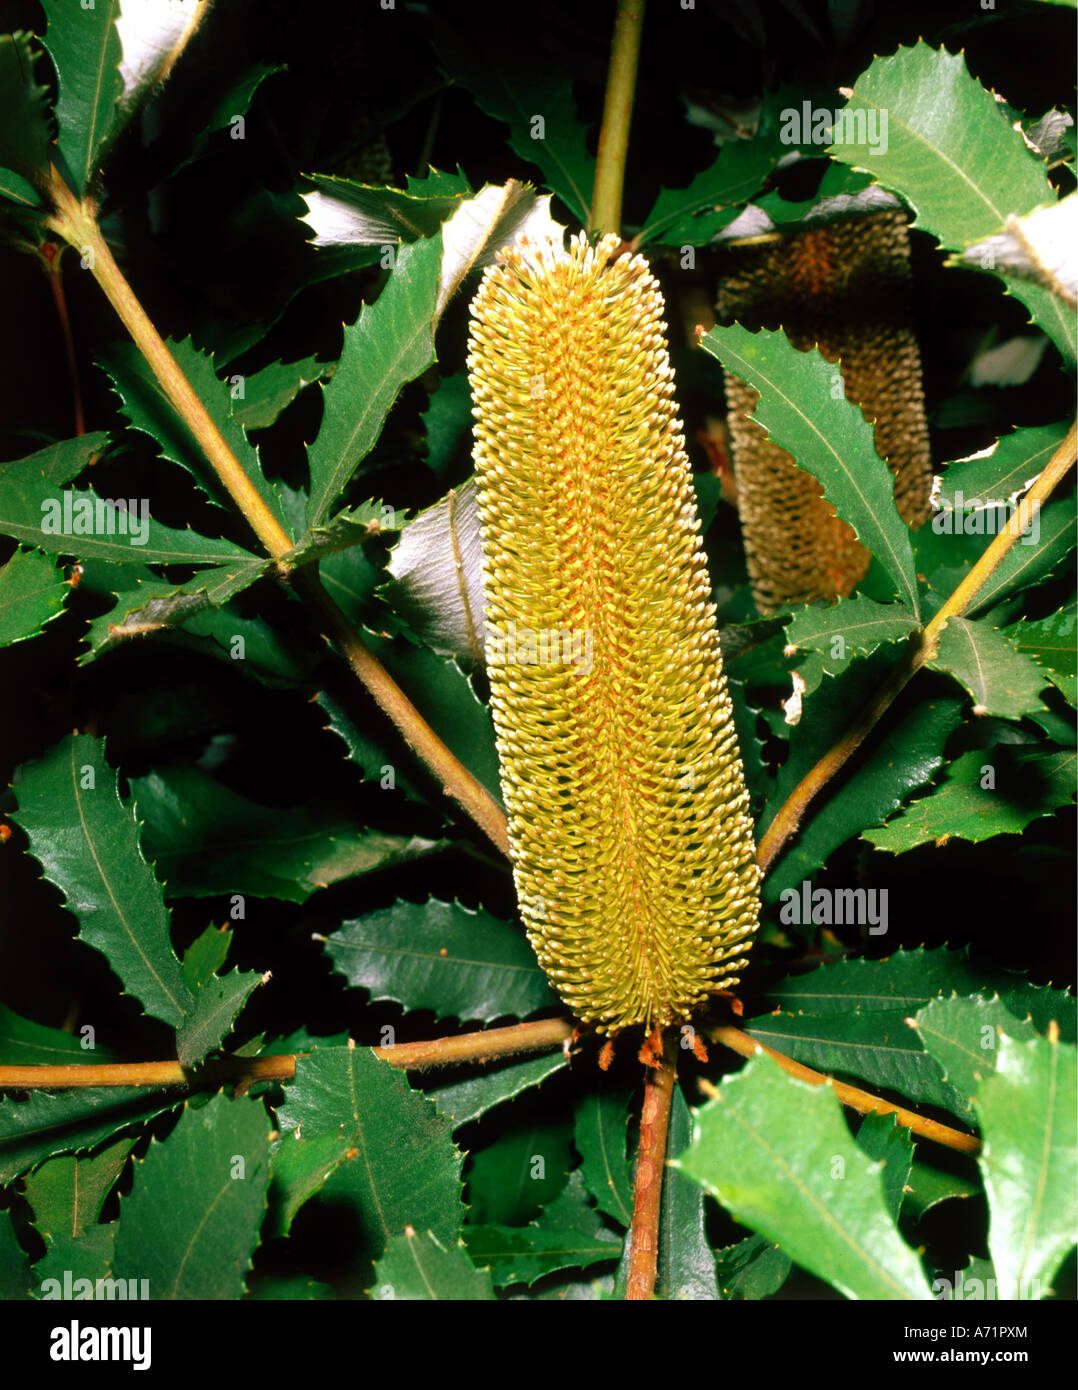 botany, Banksia, Banksia conferta, blossom, at branch, blooming, leaves, Proteales, Proteaceae, yellow, flowering, Rosidae, dist Stock Photo